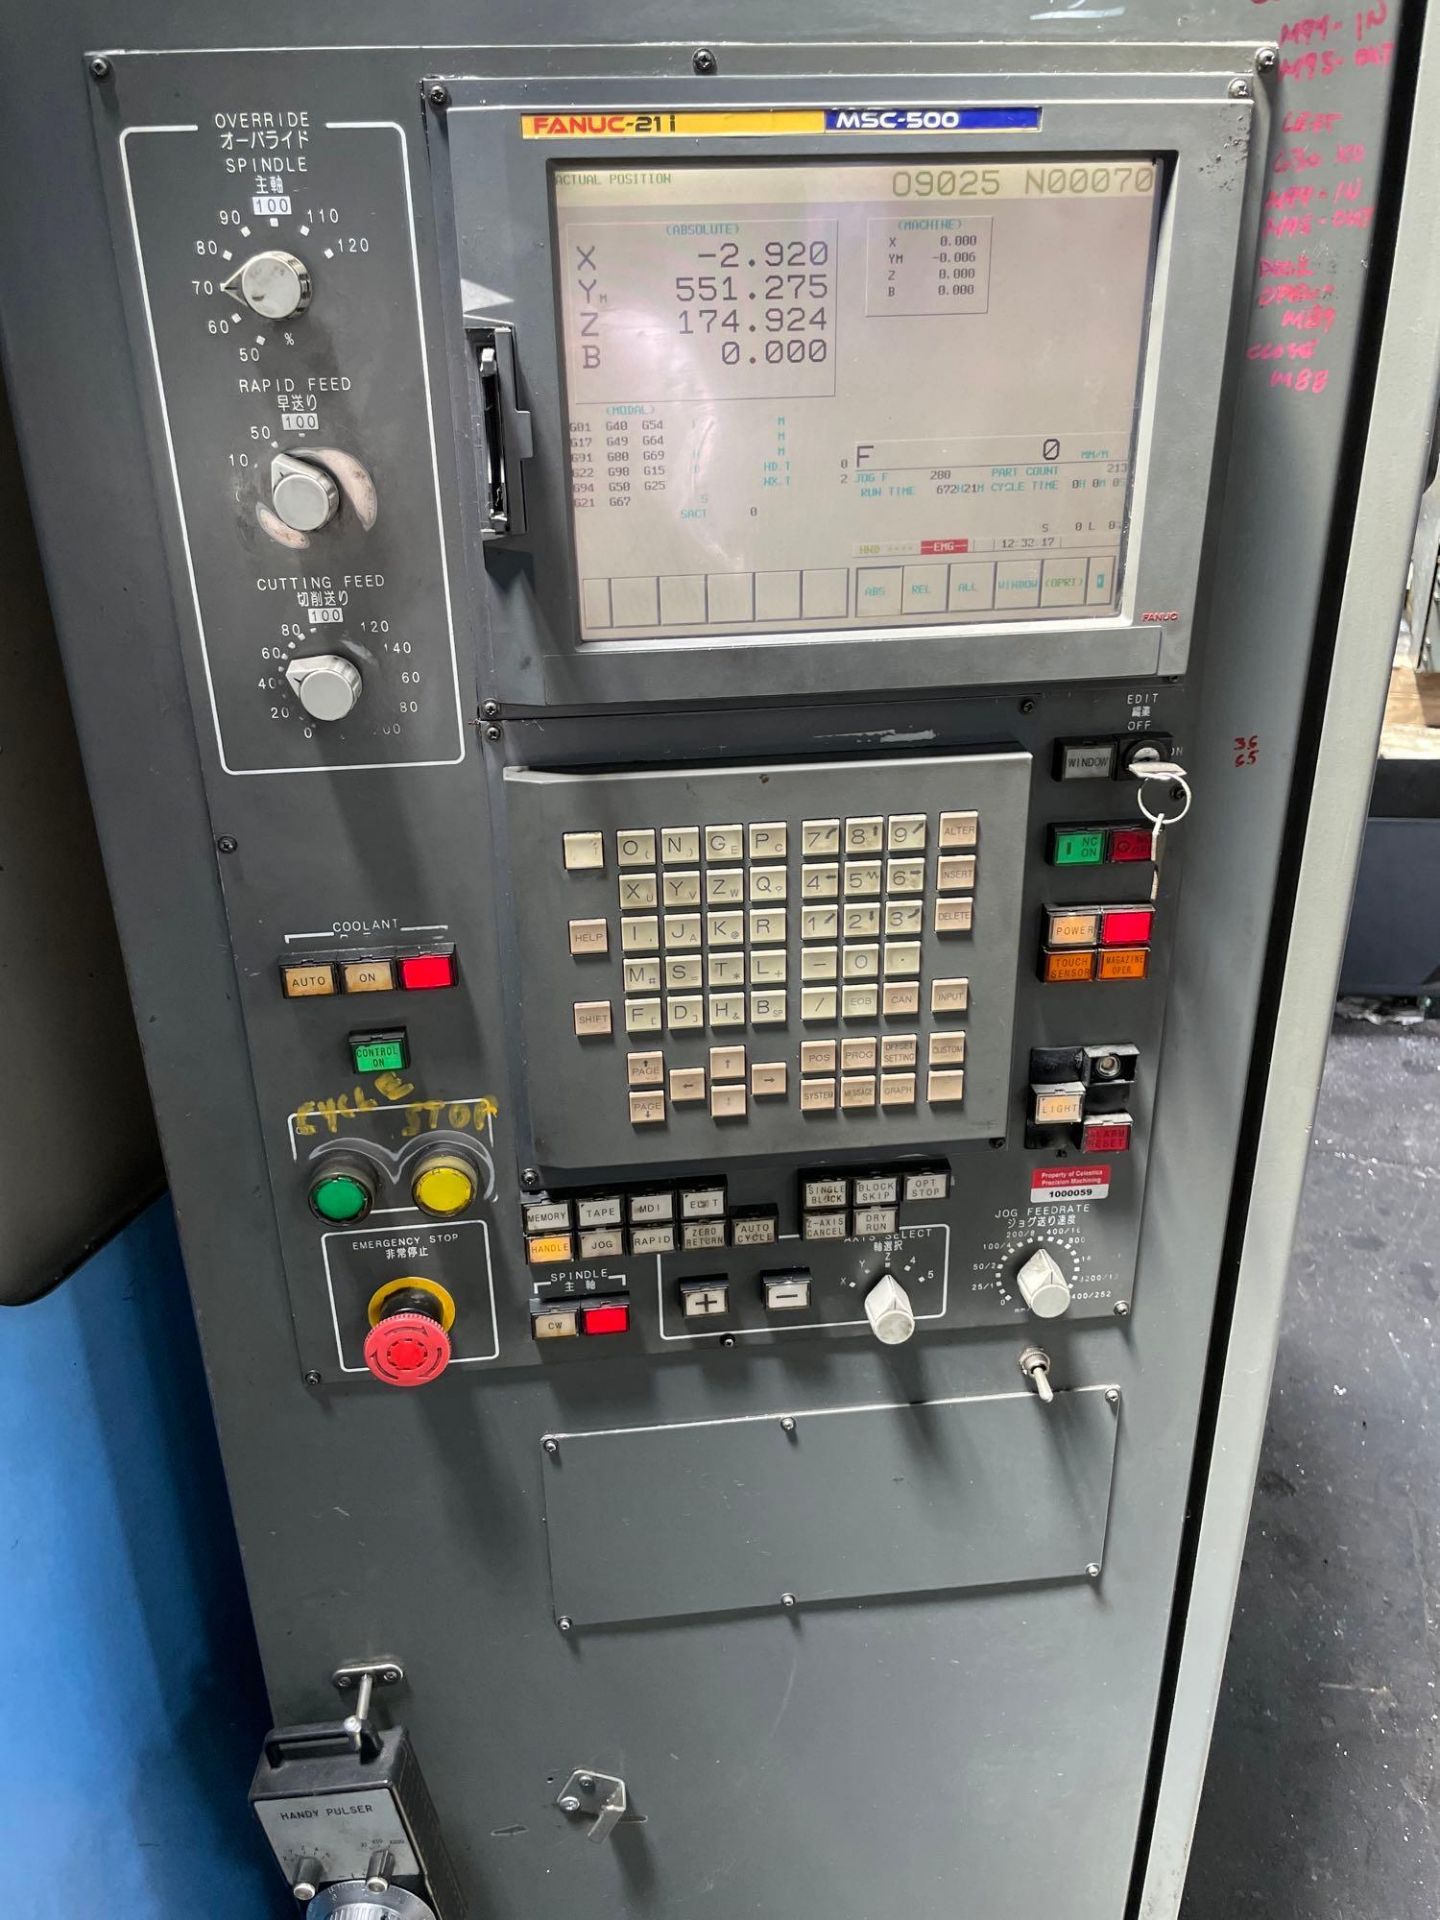 Toyoda FA1050 4 Axis, Fanuc 21i Ctrl, 41” Pallet, 120ATC, CT-50, Chip Conveyor, s/n NM8652, 1999 - Image 5 of 8